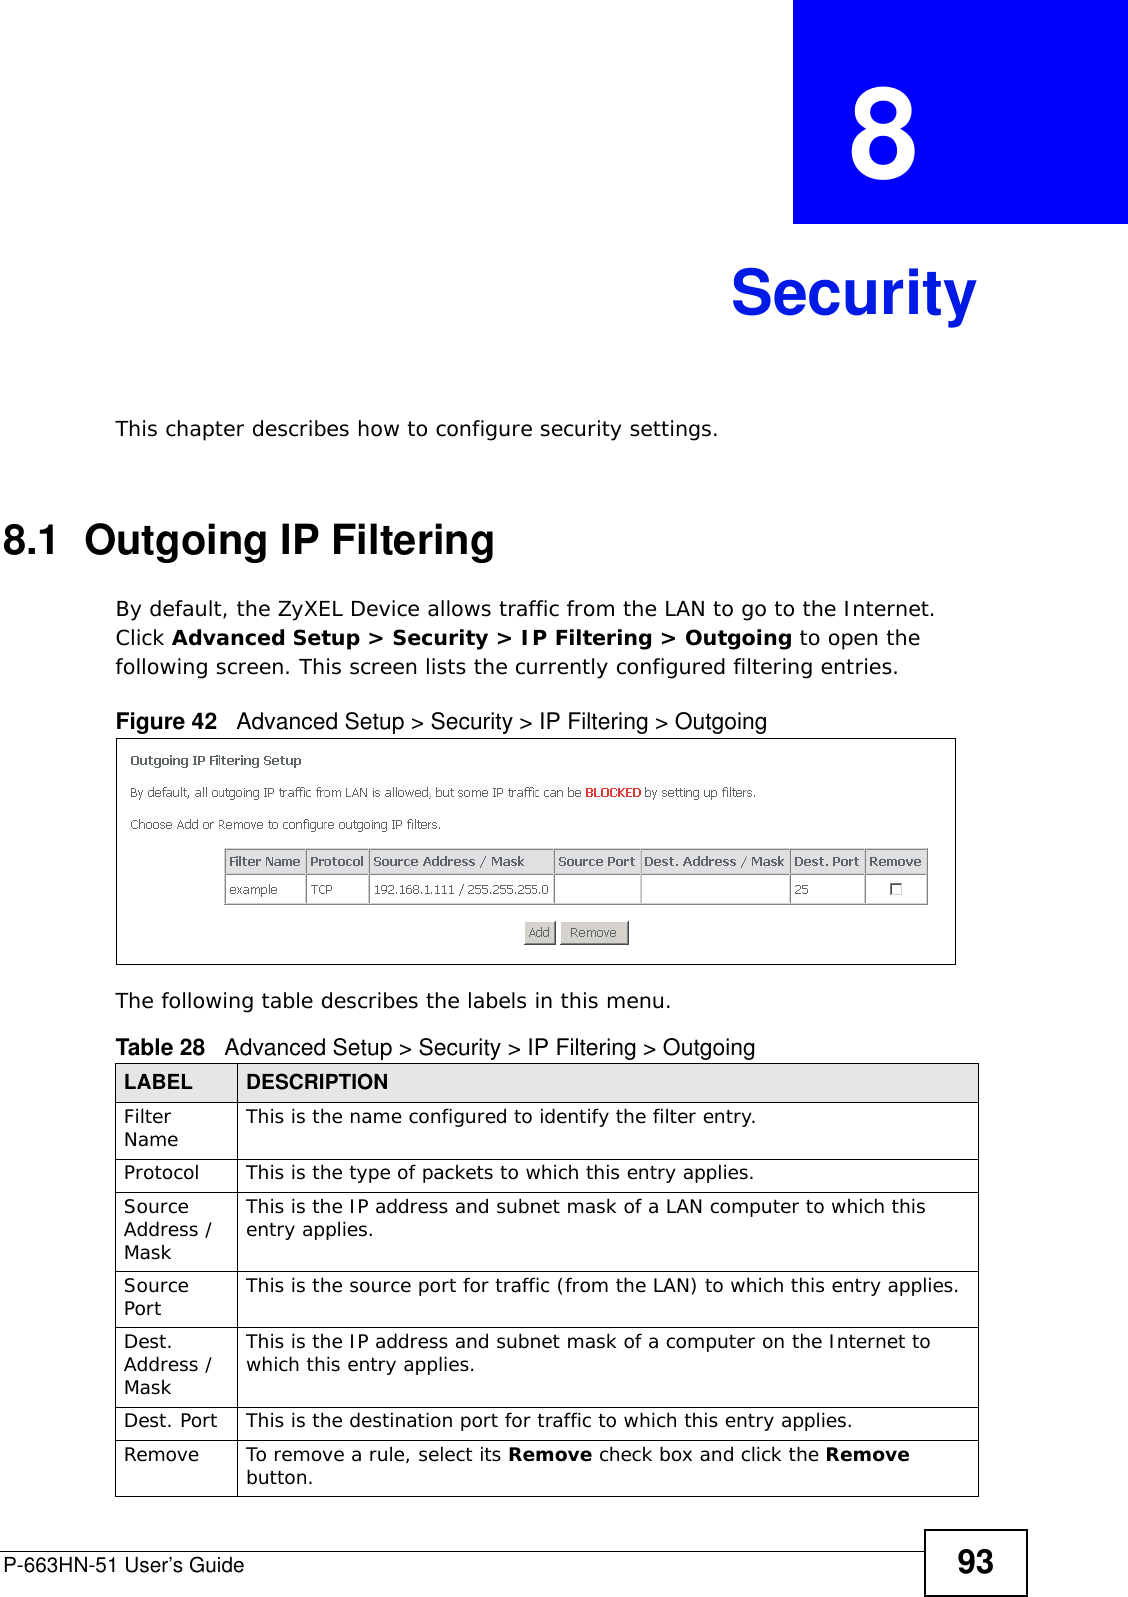 P-663HN-51 User’s Guide 93CHAPTER  8 SecurityThis chapter describes how to configure security settings.8.1  Outgoing IP Filtering By default, the ZyXEL Device allows traffic from the LAN to go to the Internet. Click Advanced Setup &gt; Security &gt; IP Filtering &gt; Outgoing to open the following screen. This screen lists the currently configured filtering entries. Figure 42   Advanced Setup &gt; Security &gt; IP Filtering &gt; OutgoingThe following table describes the labels in this menu.Table 28   Advanced Setup &gt; Security &gt; IP Filtering &gt; OutgoingLABEL DESCRIPTIONFilter Name This is the name configured to identify the filter entry.Protocol This is the type of packets to which this entry applies. Source Address / MaskThis is the IP address and subnet mask of a LAN computer to which this entry applies.Source Port This is the source port for traffic (from the LAN) to which this entry applies.Dest. Address / MaskThis is the IP address and subnet mask of a computer on the Internet to which this entry applies.Dest. Port This is the destination port for traffic to which this entry applies.Remove To remove a rule, select its Remove check box and click the Remove button. 